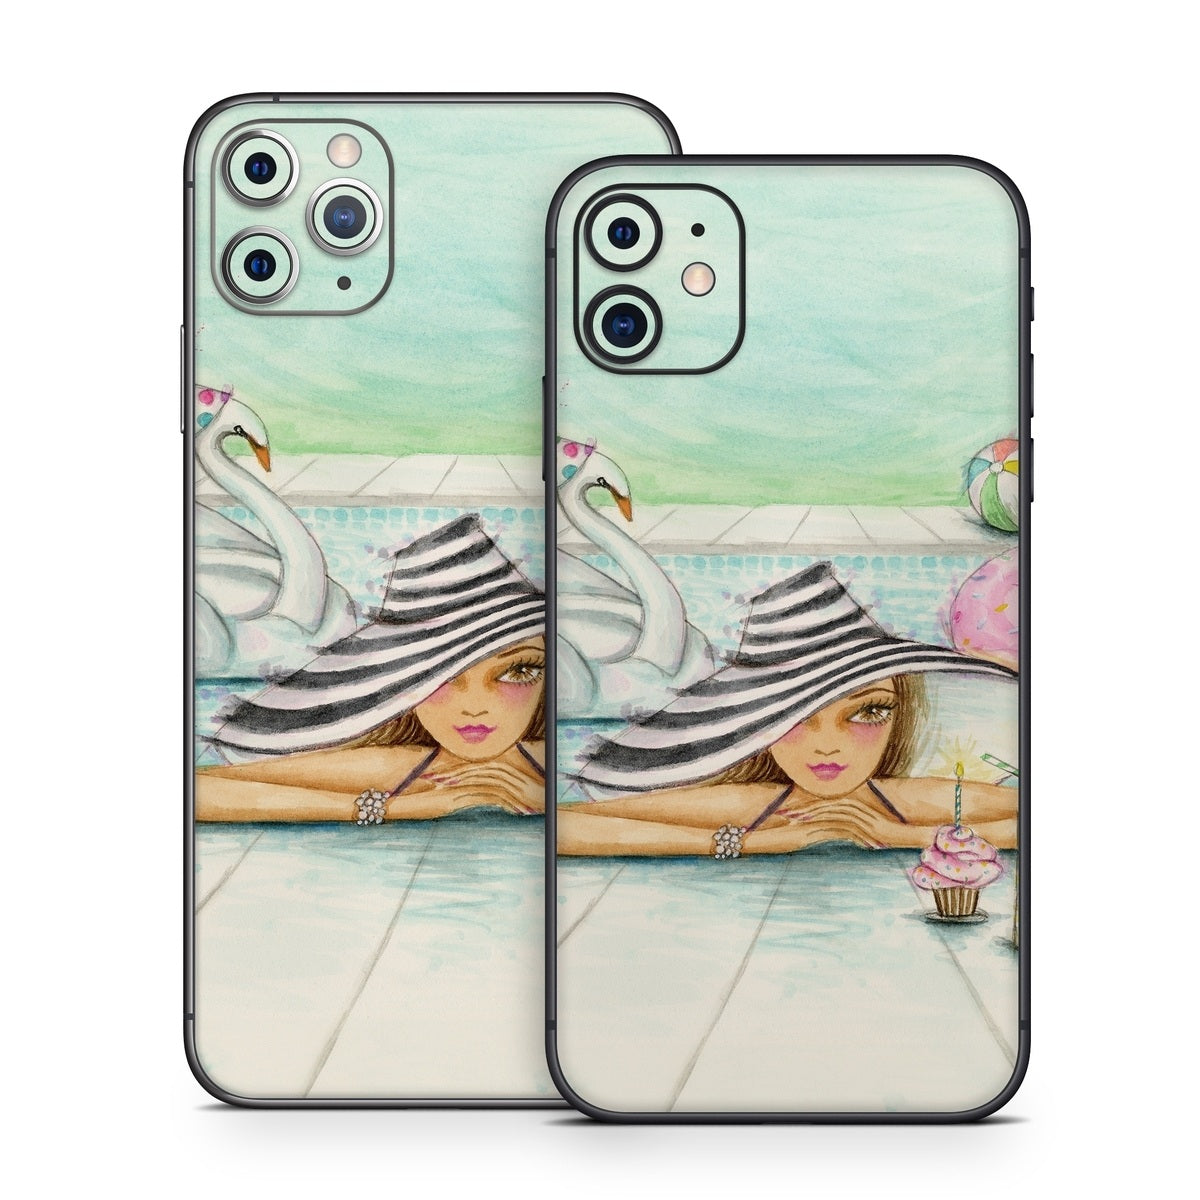 Delphine at the Pool Party - Apple iPhone 11 Skin